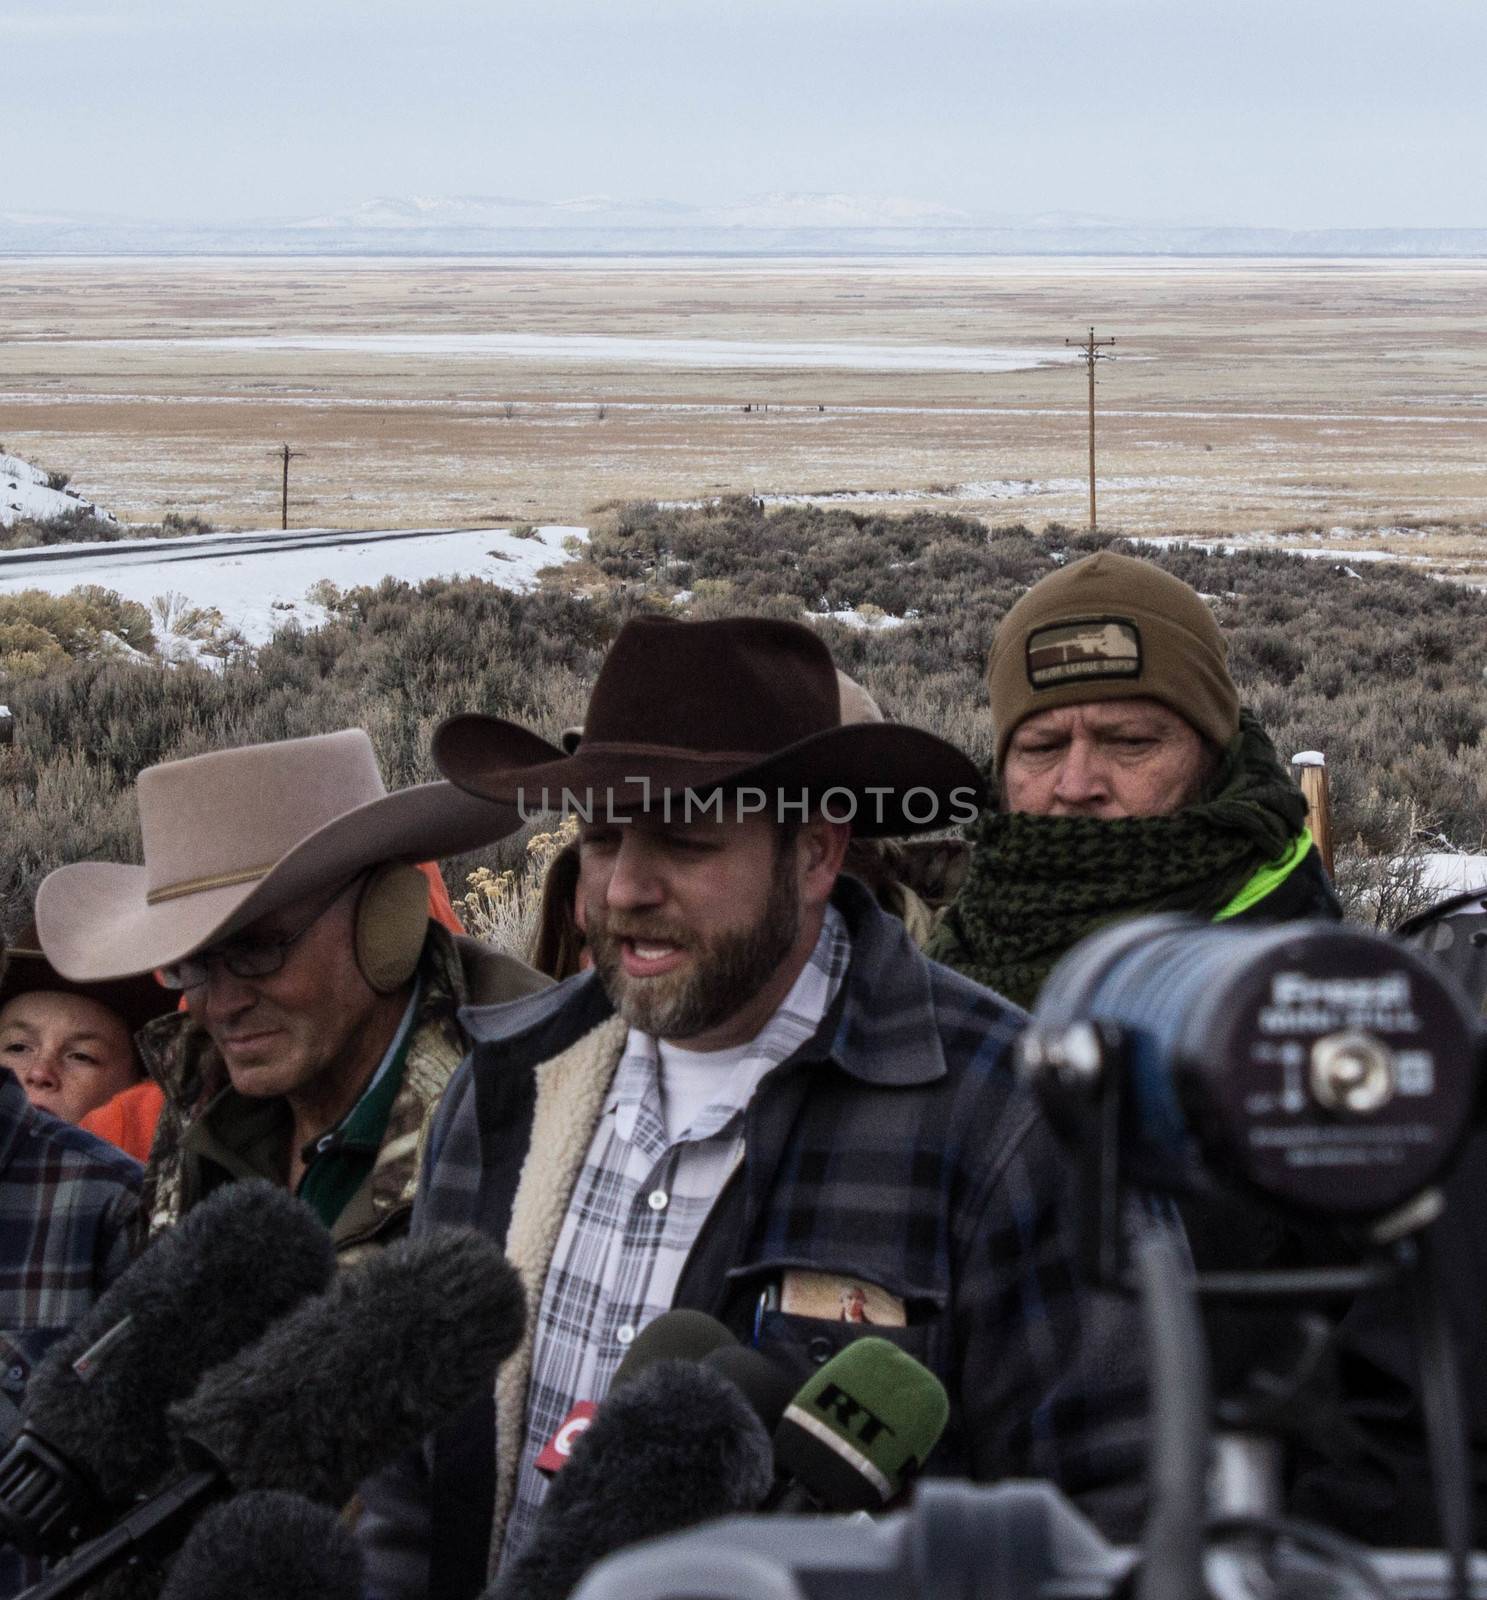 USA, Burns: Ammon Bundy speaks to the press as he and a group of armed militiamen continue their occupation of a federal building at the Malheur National Wildlife Refuge near Burns, Oregon on January 4, 2016. Members of the militia say their motives lie in the unfair treatment of Dwight and Steven Hammond, who have been sentenced to five years in prison for burning roughly 130 acres of land in 2001. Prosecutors have accused the Hammonds of burning the land in an attempt to cover up evidence of illegal deer poaching; protesters claim the government has no right to punish the Hammonds for the use of their land.